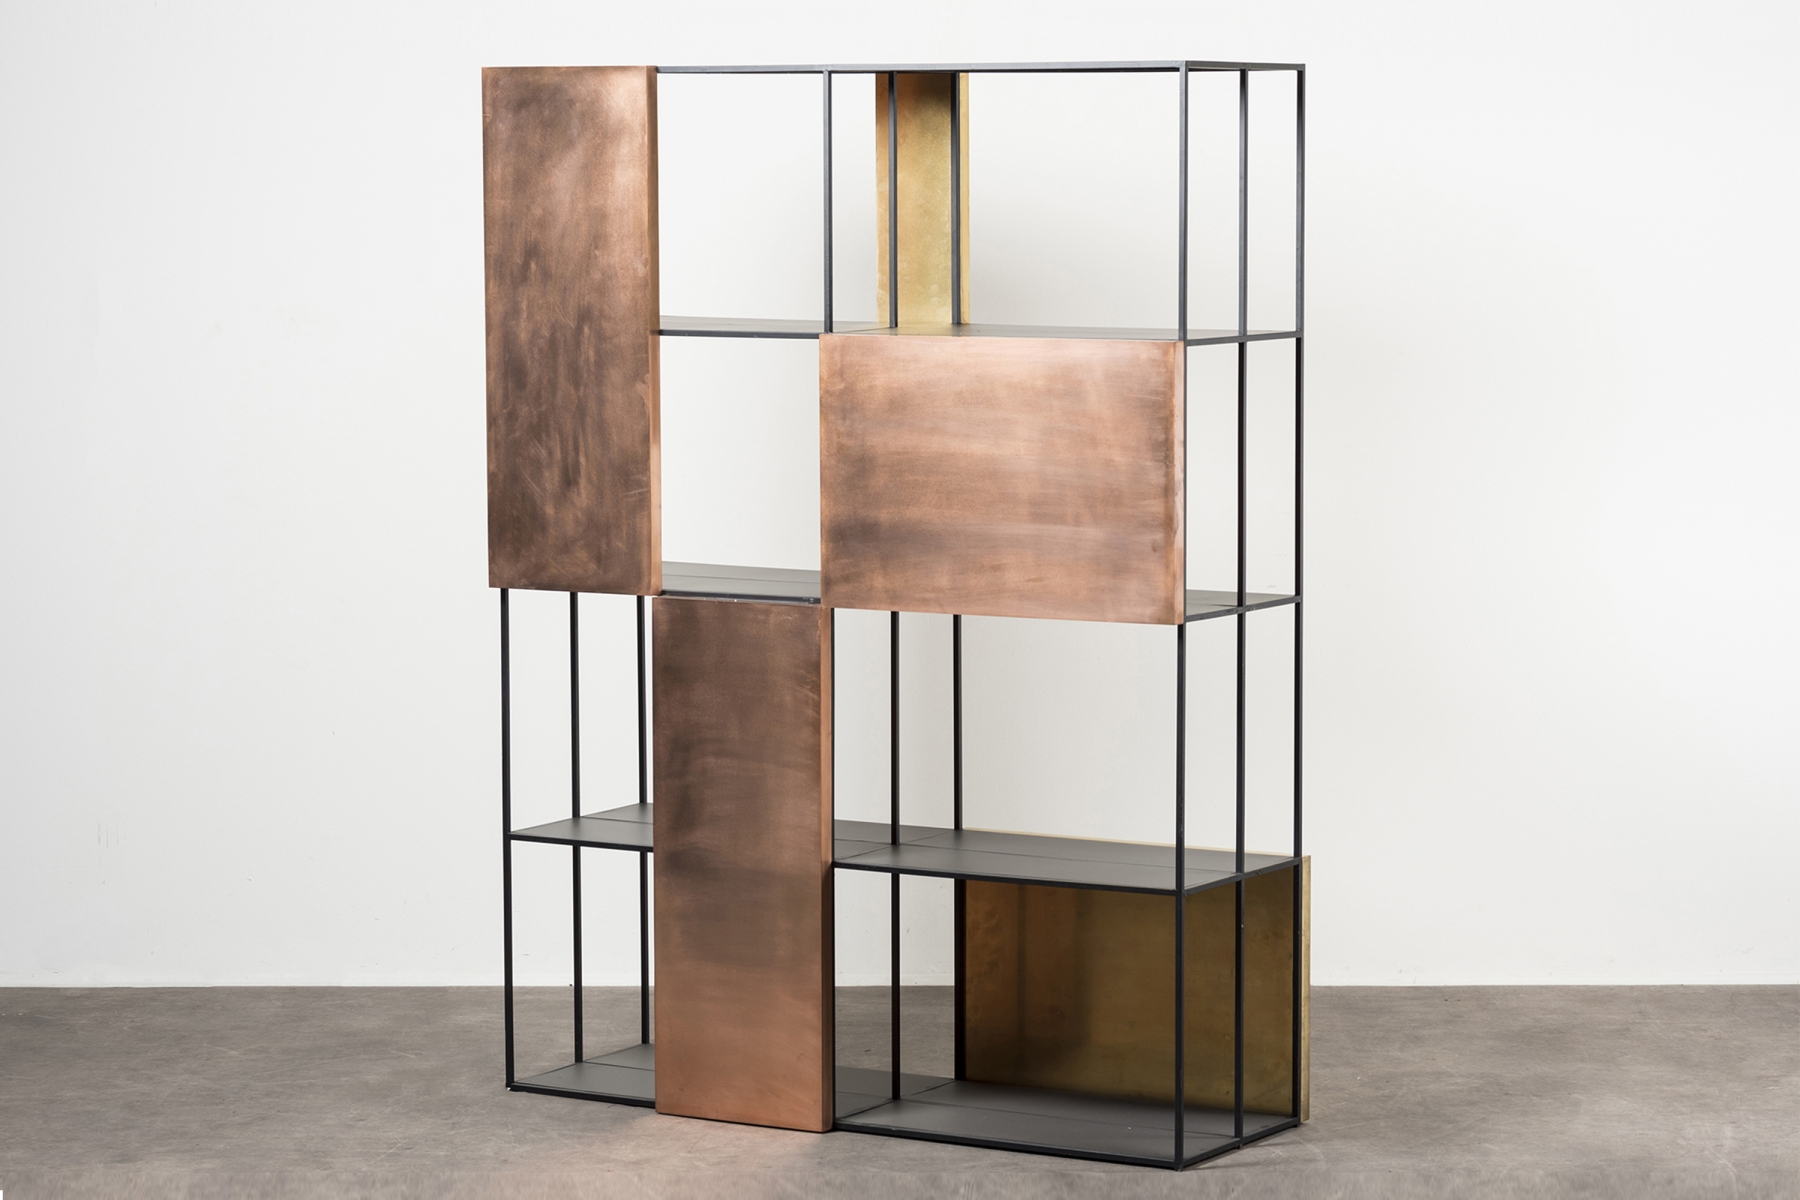 'Cages' bookcase Studio Nucleo  pic-1